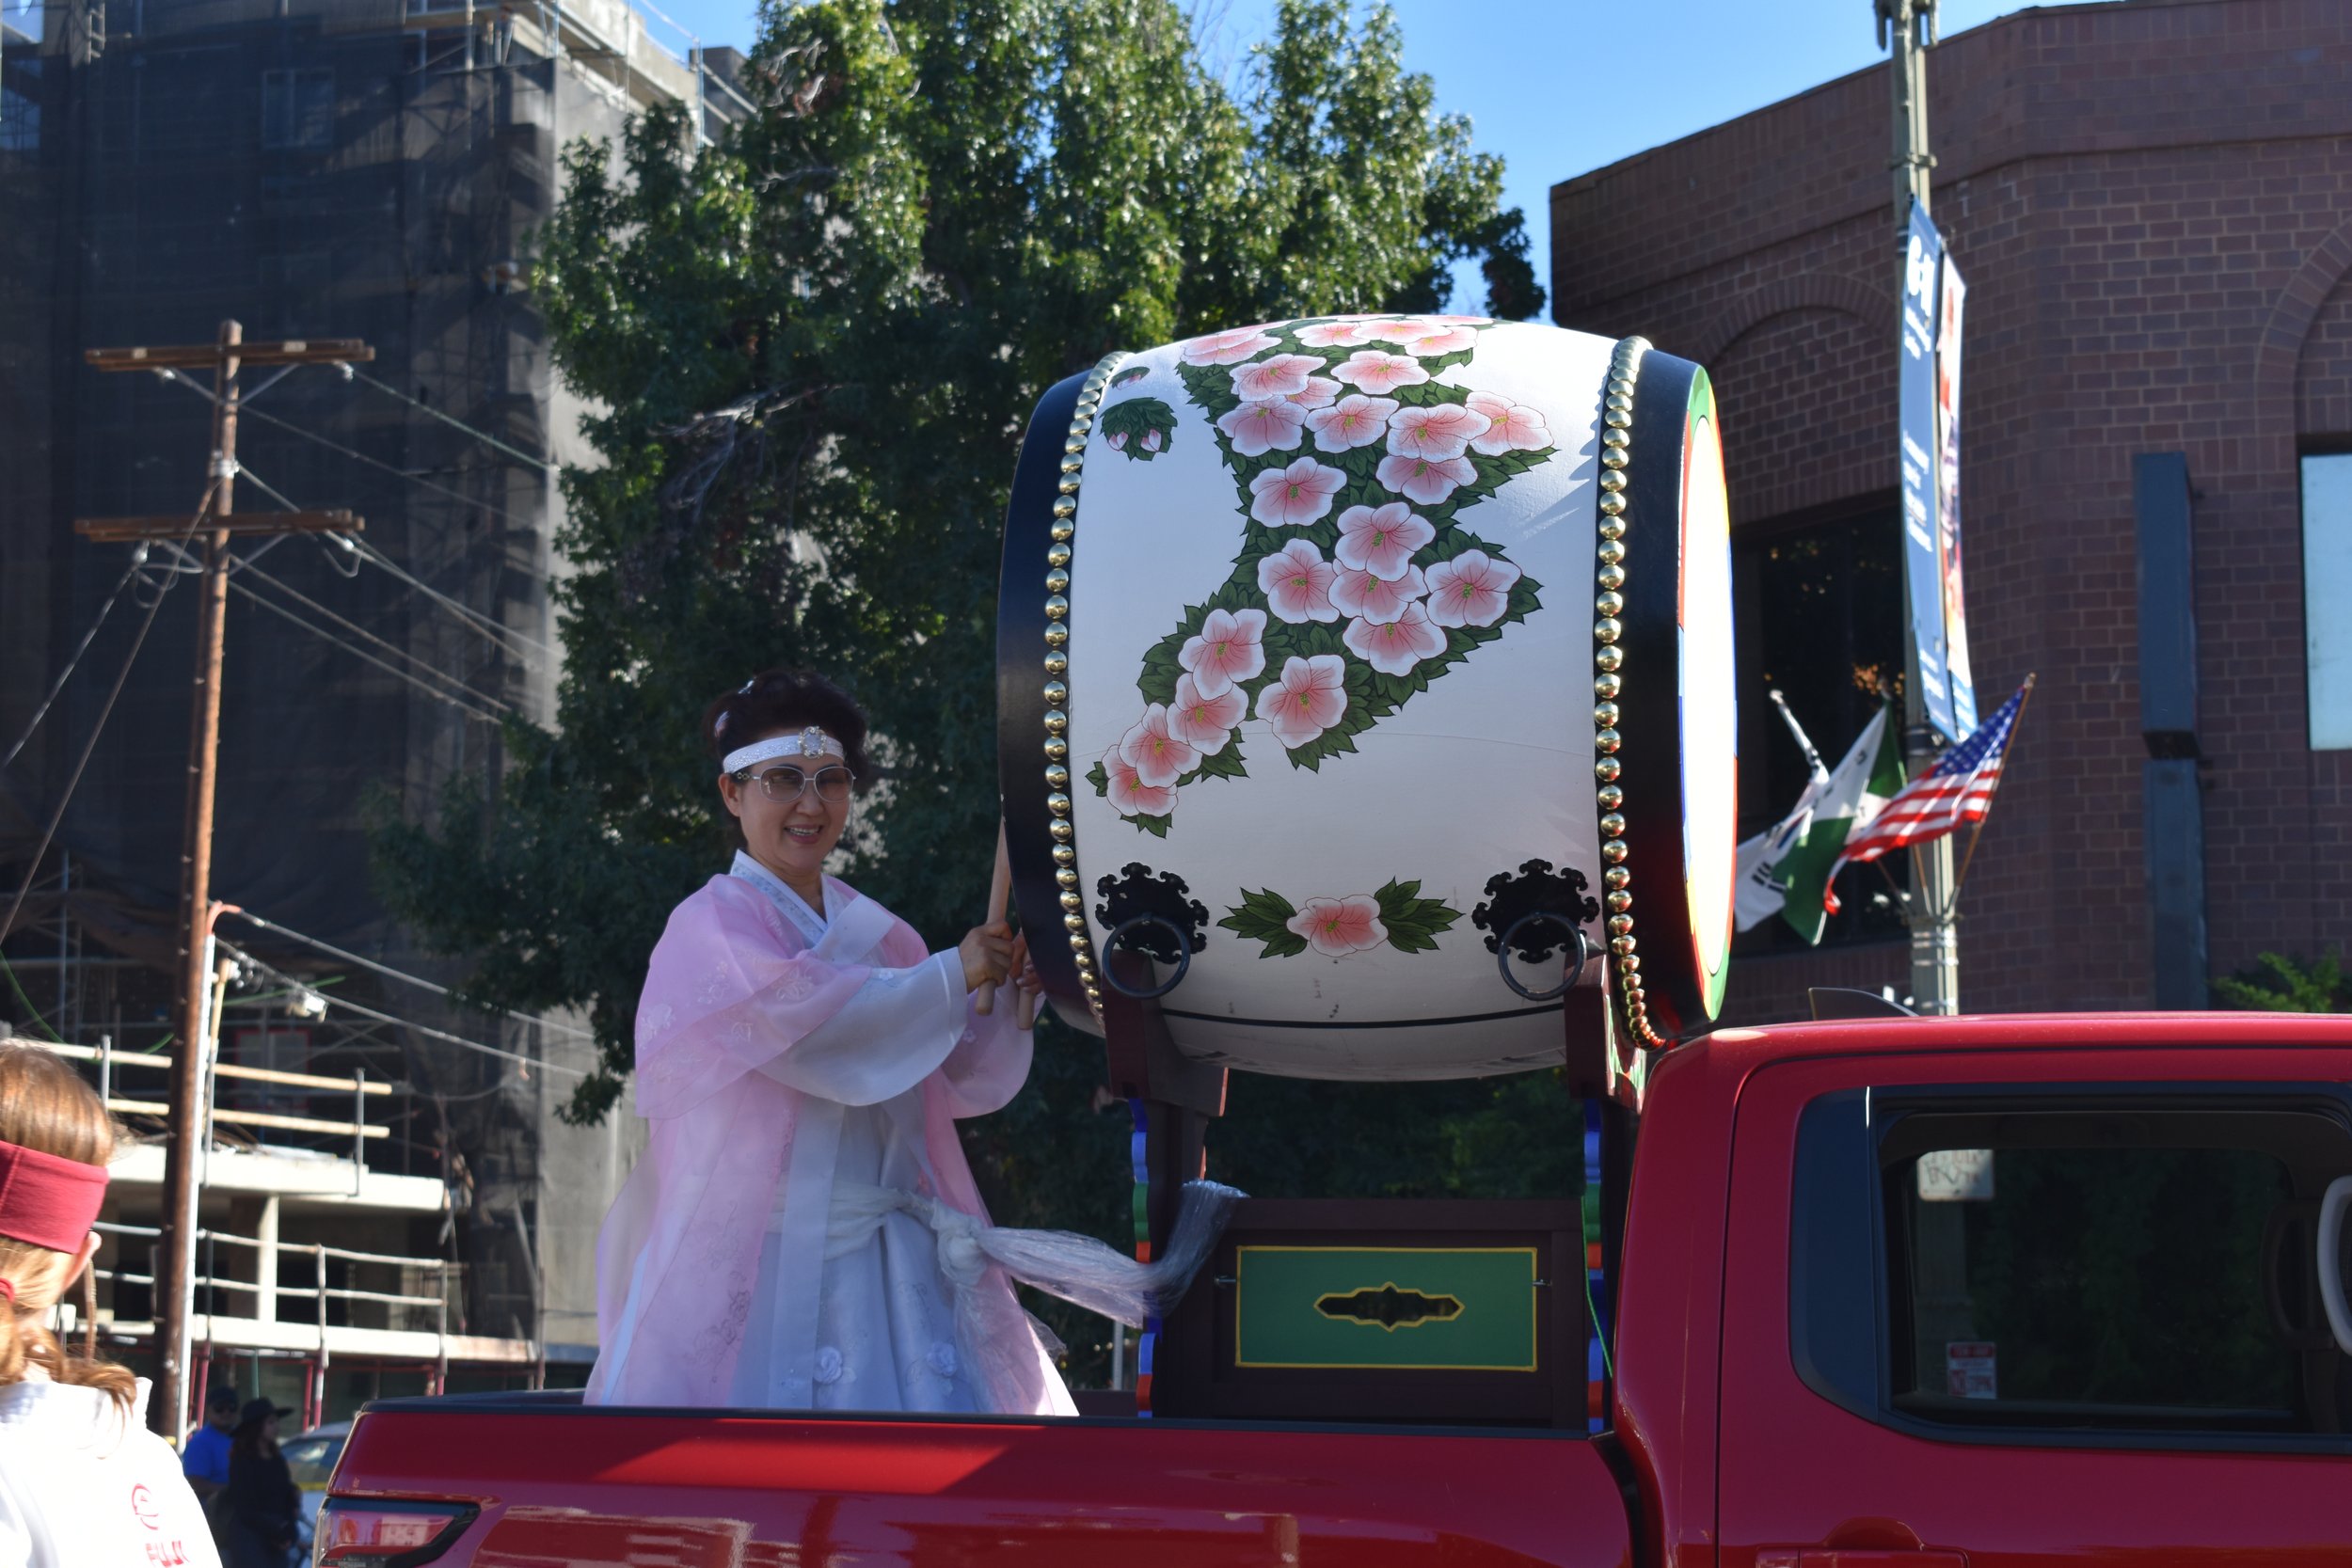  Traditional Korean performer plays a traditional Korean drum known as the Buk while being driven in a red pick up truck for the 49th annual Korean Festival parade in Koreatown, Los Angeles, Calif. on Saturday, Sept. 24. (Guadalupe Perez | The Corsai